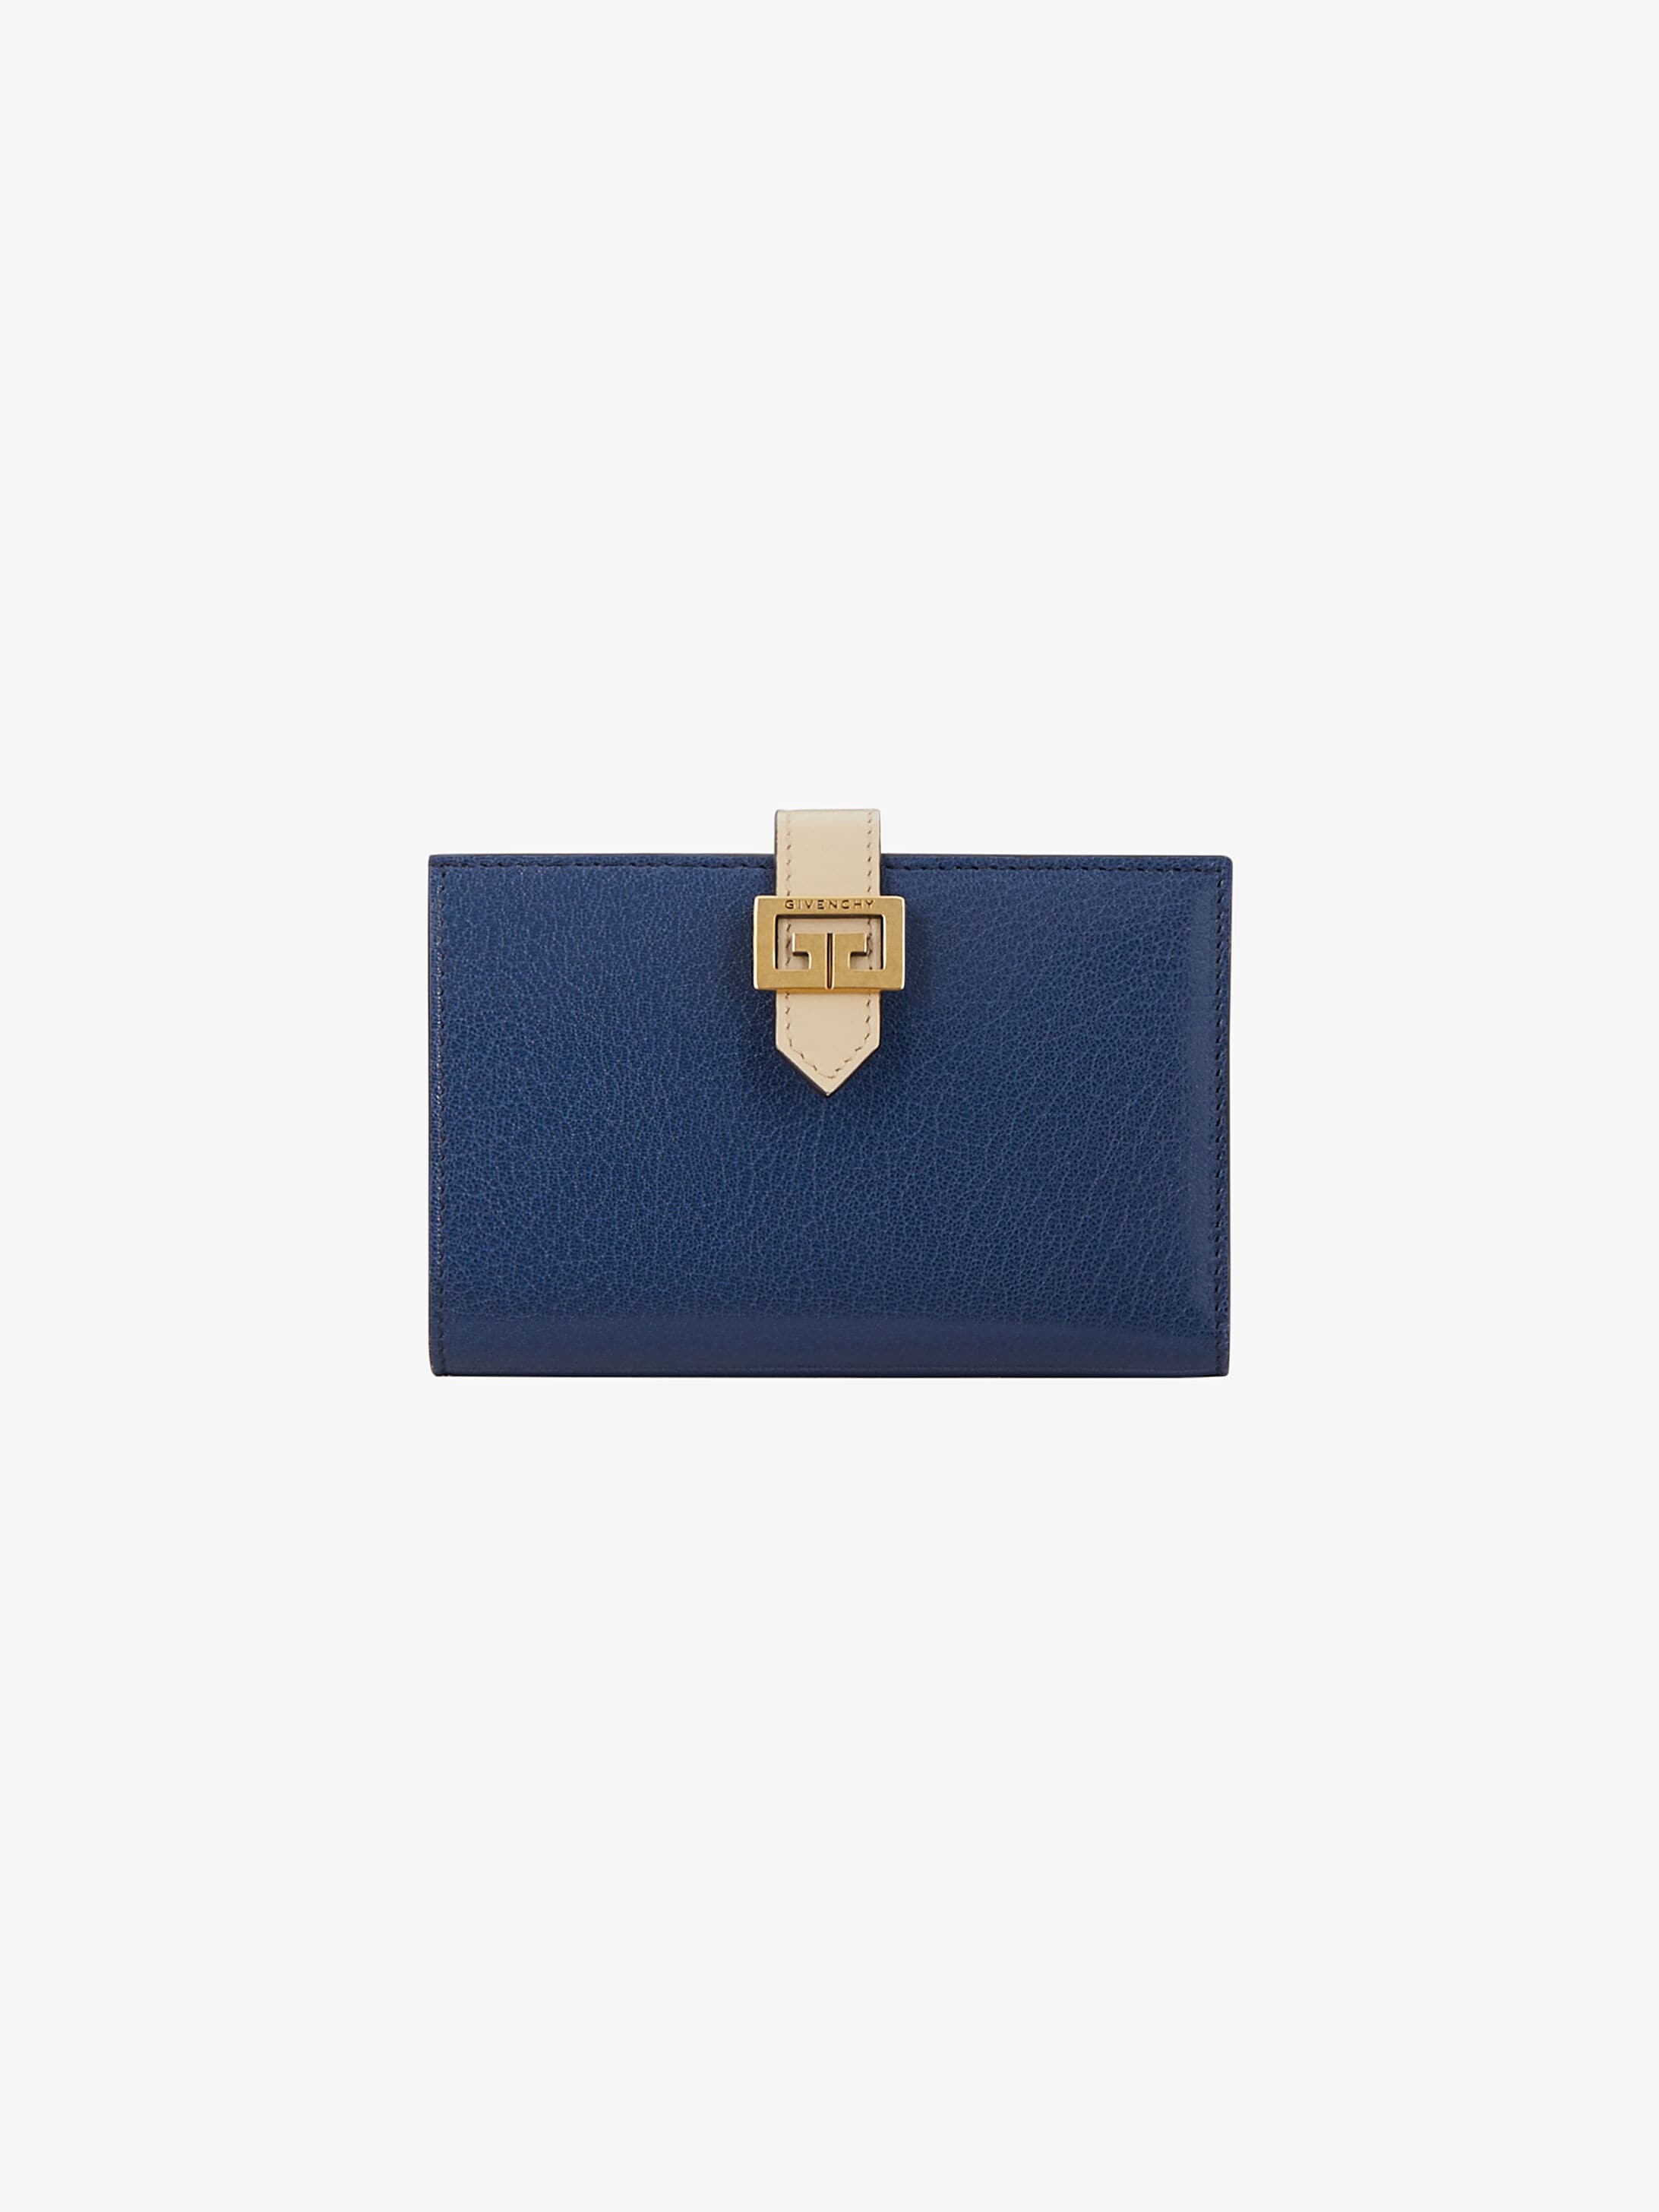 givenchy wallets women's